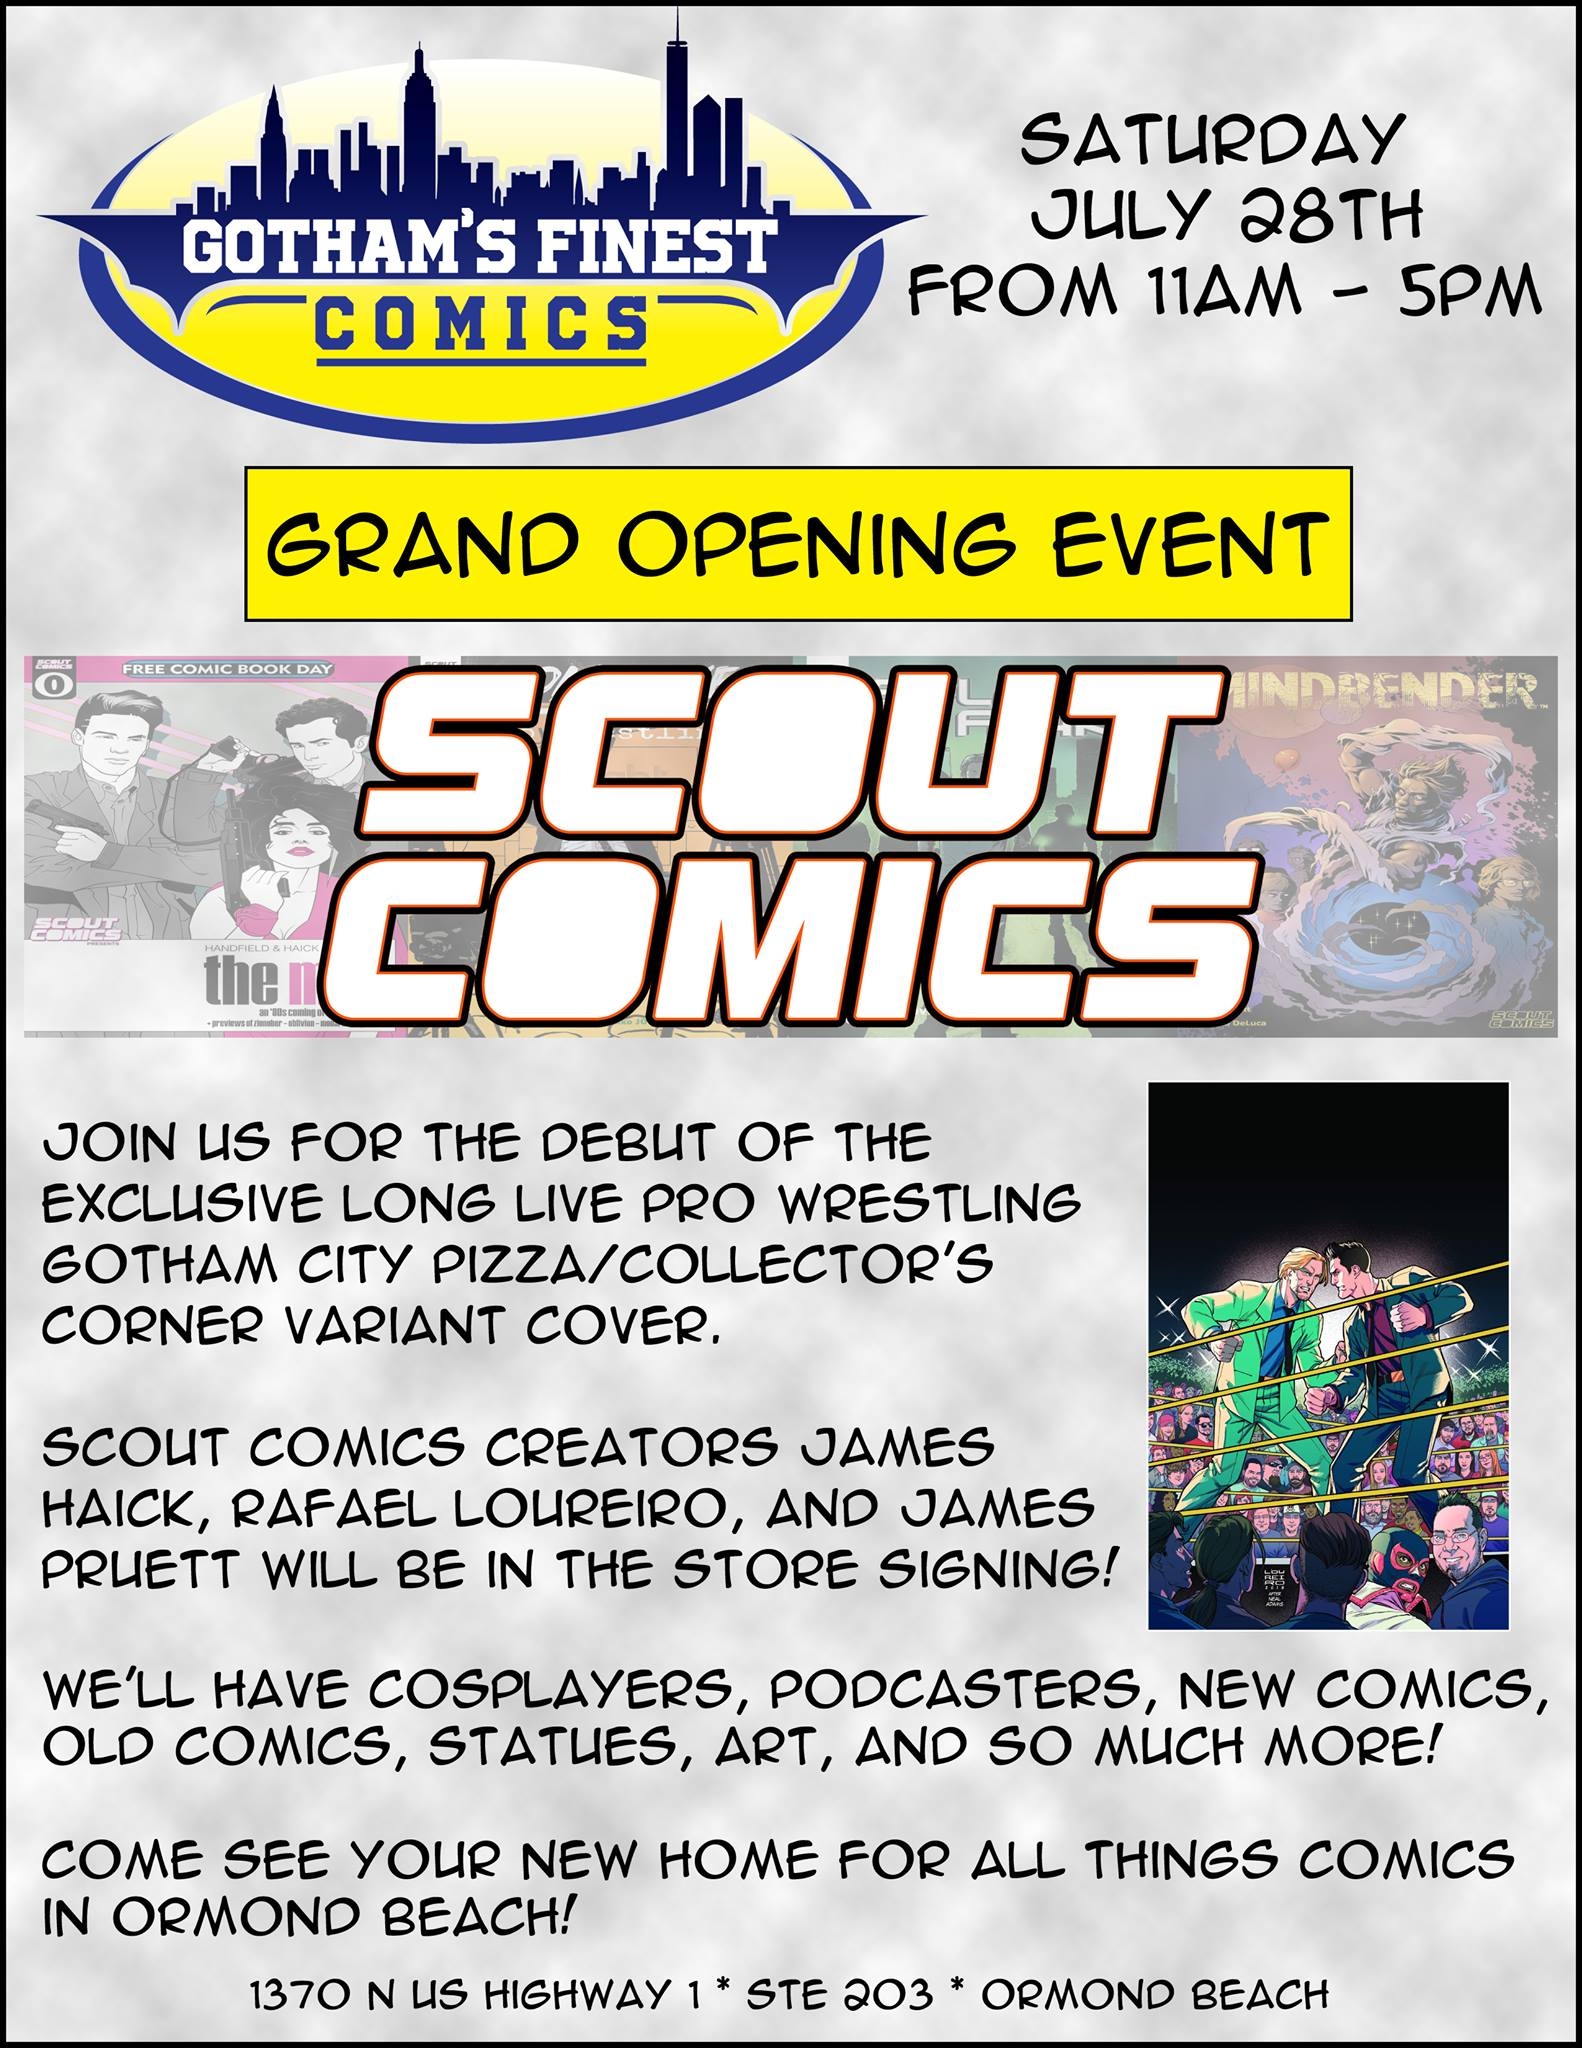 Scout Comics is helping Gotham’s Finest Comics Open in Style!